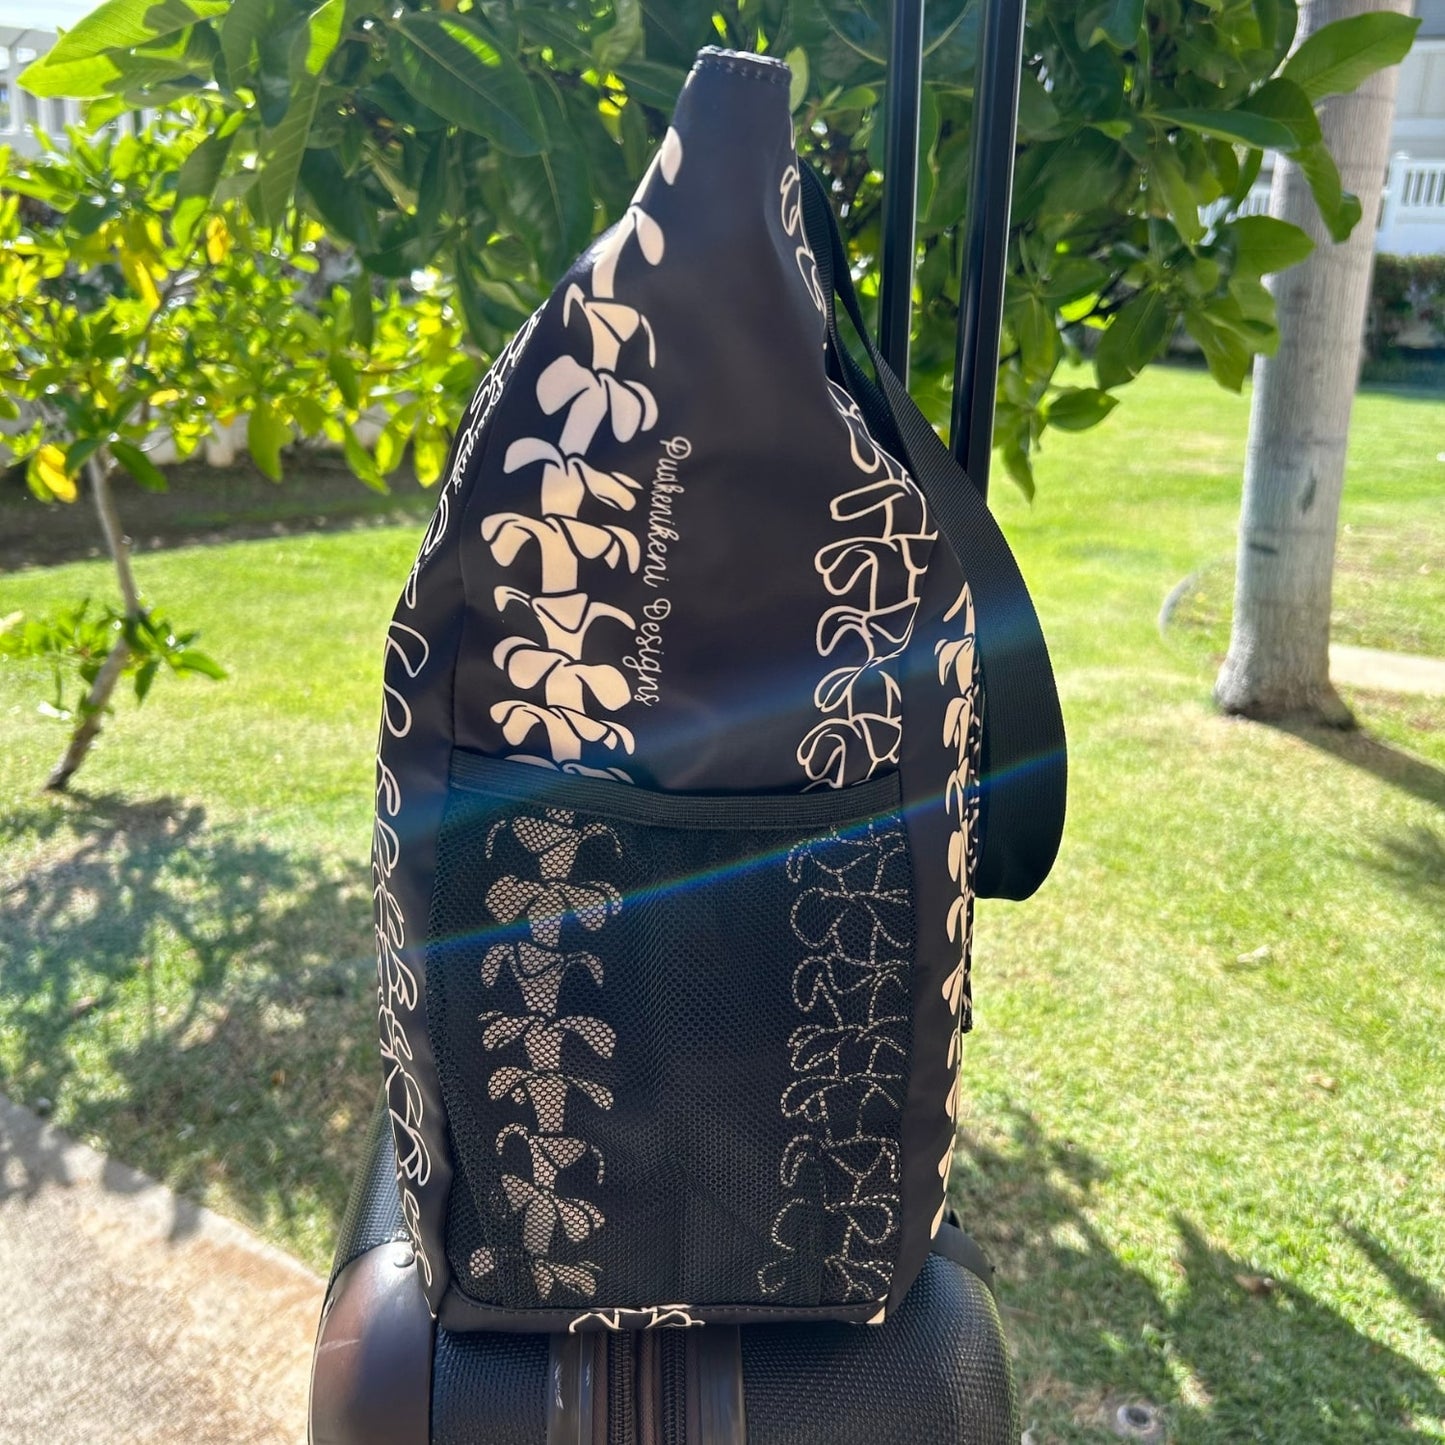 Holoholo Bag for travel from Puakenikeni Designs - use for beach, diaper bag, handbag, hula bag on a rolling suitcase side view